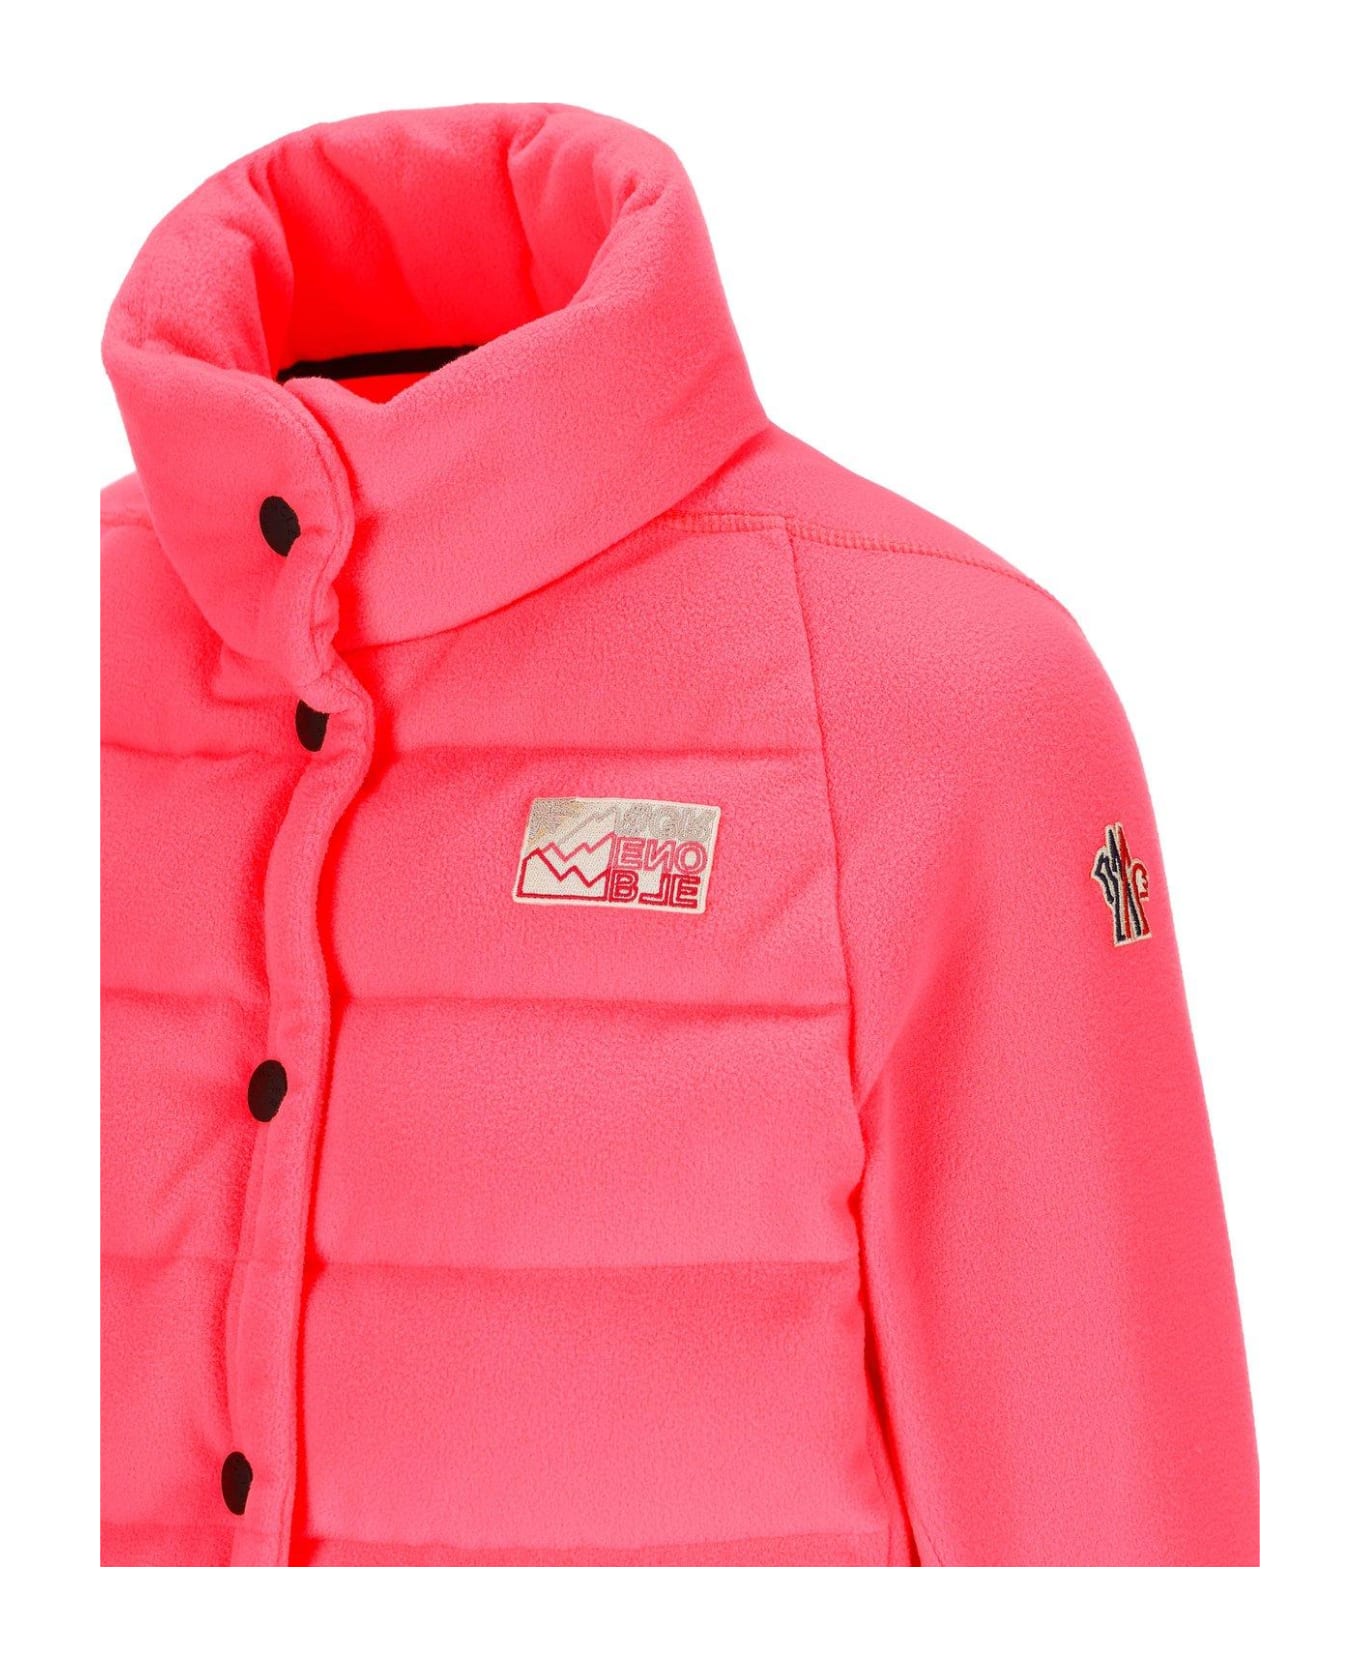 Moncler Grenoble Logo Patch Buttoned Jacket - Rosa ダウンジャケット